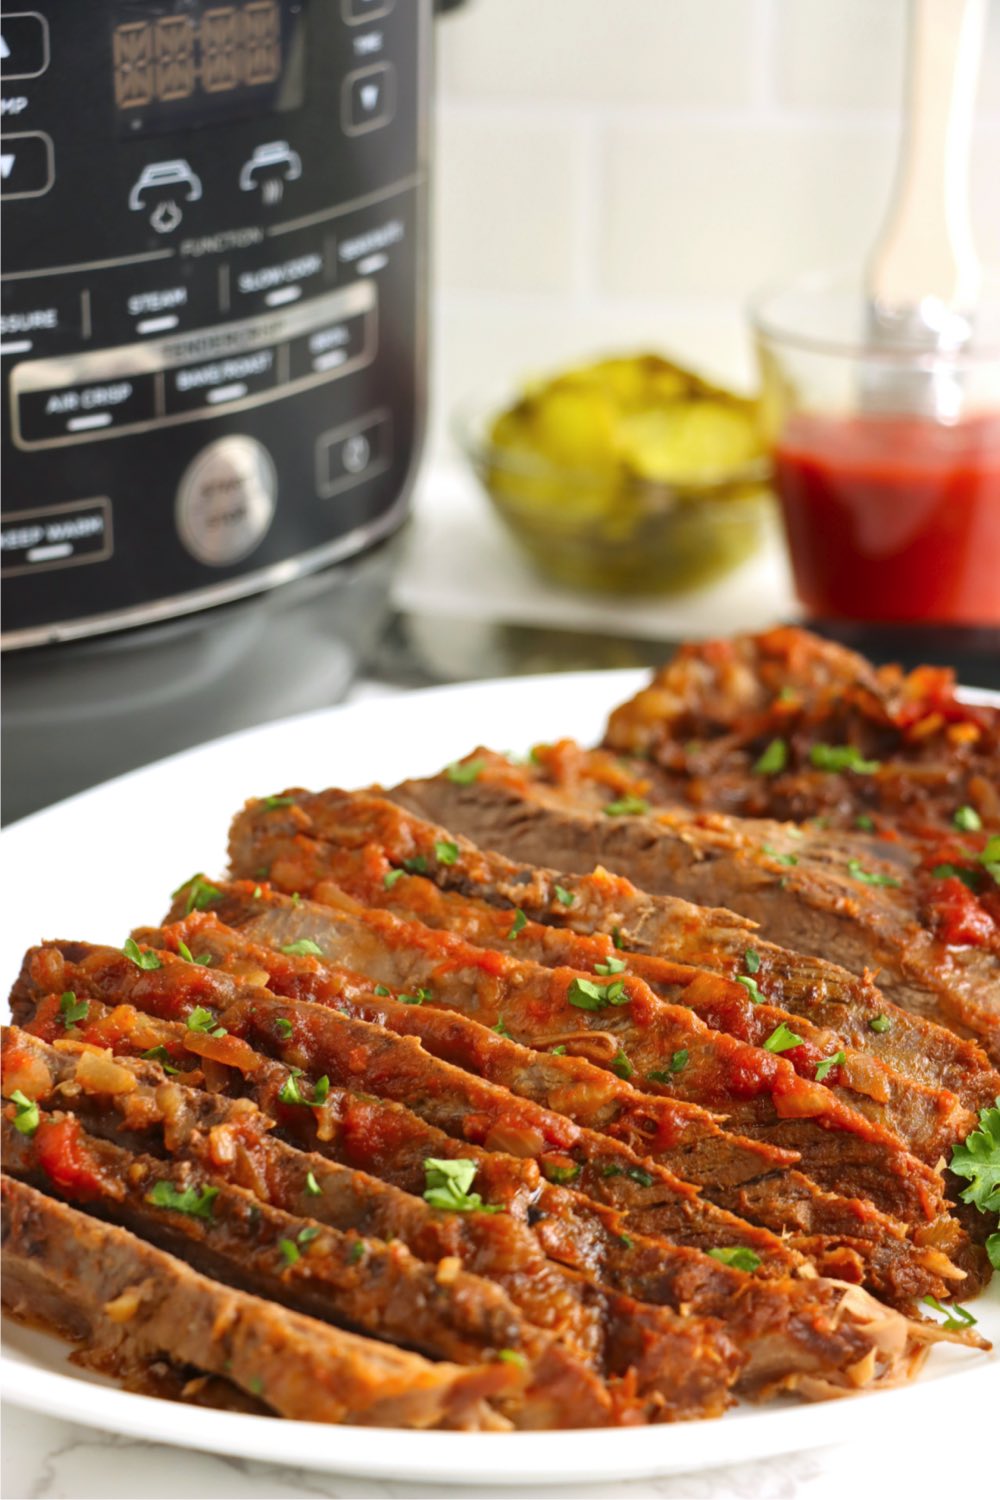 sliced beef brisket with chili sauce glazed on